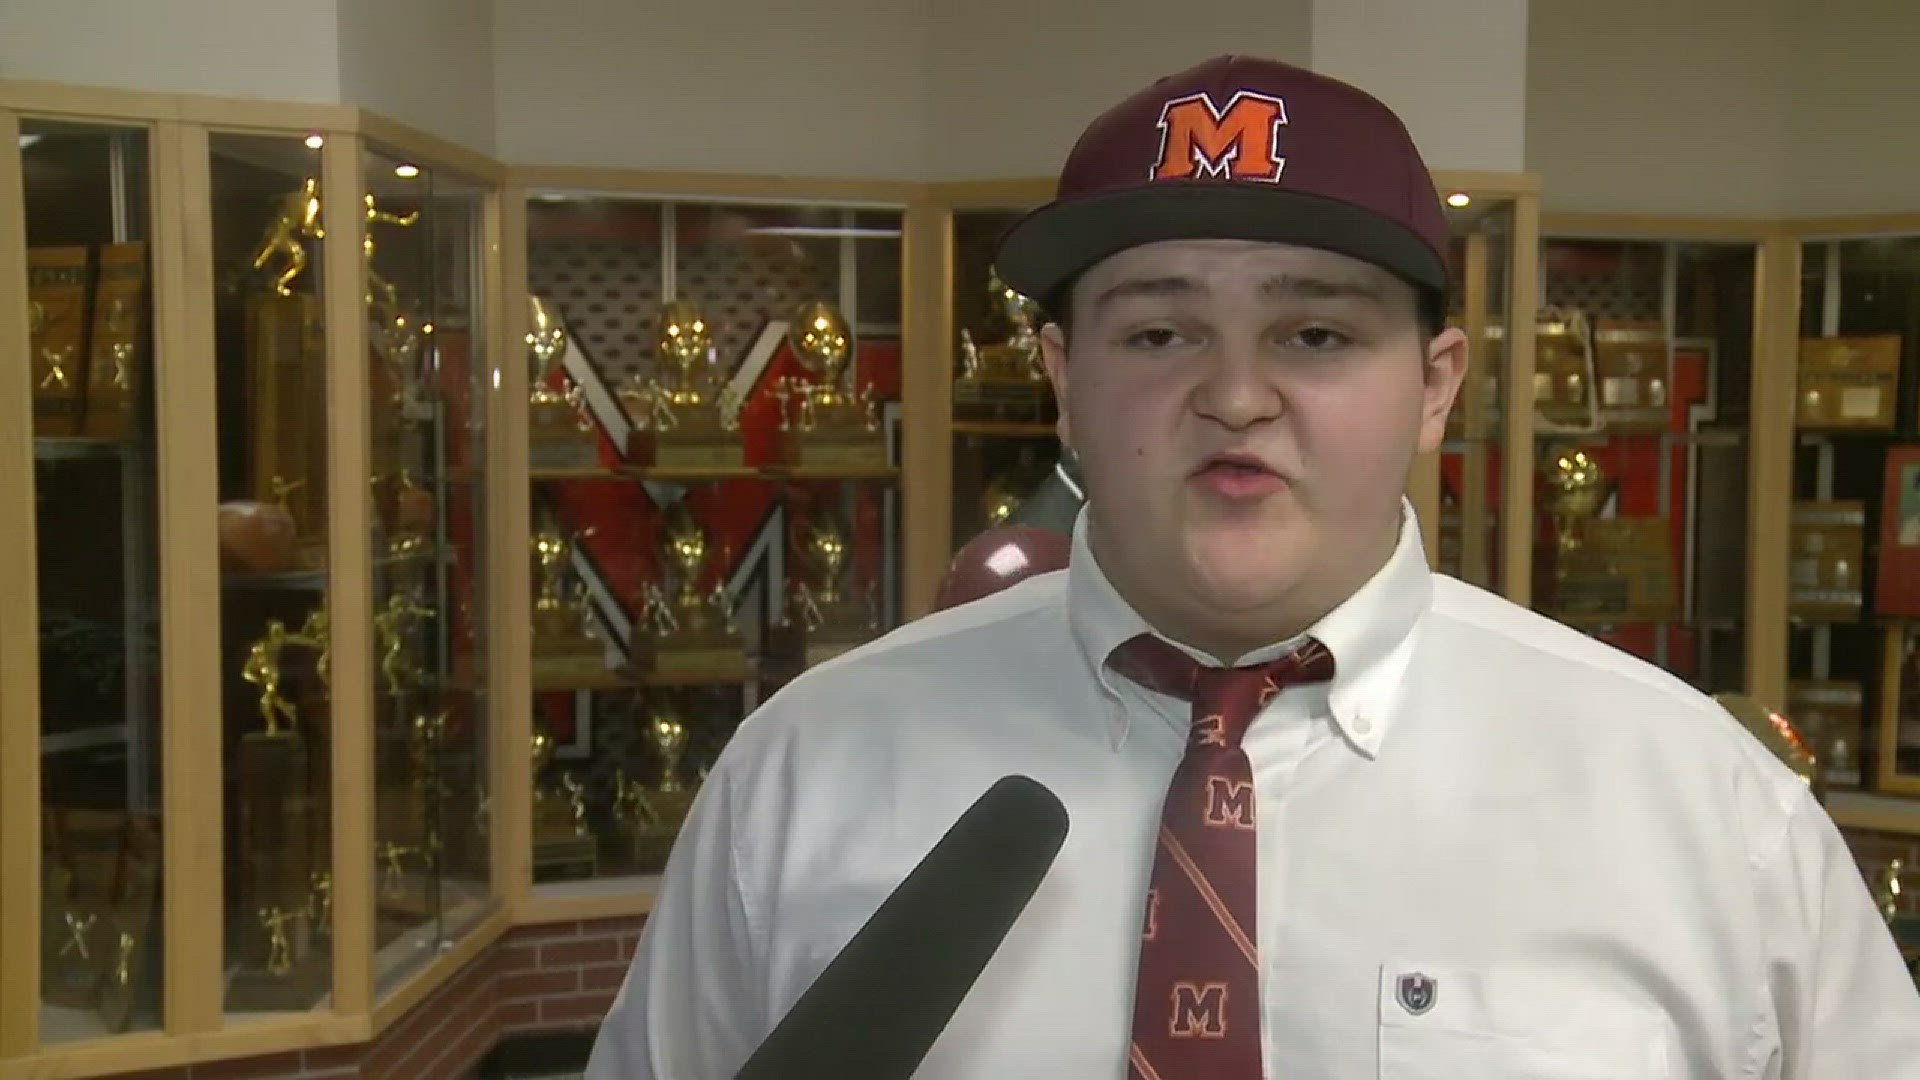 Maryville's Aric Miller stays local and signs with Maryville College.